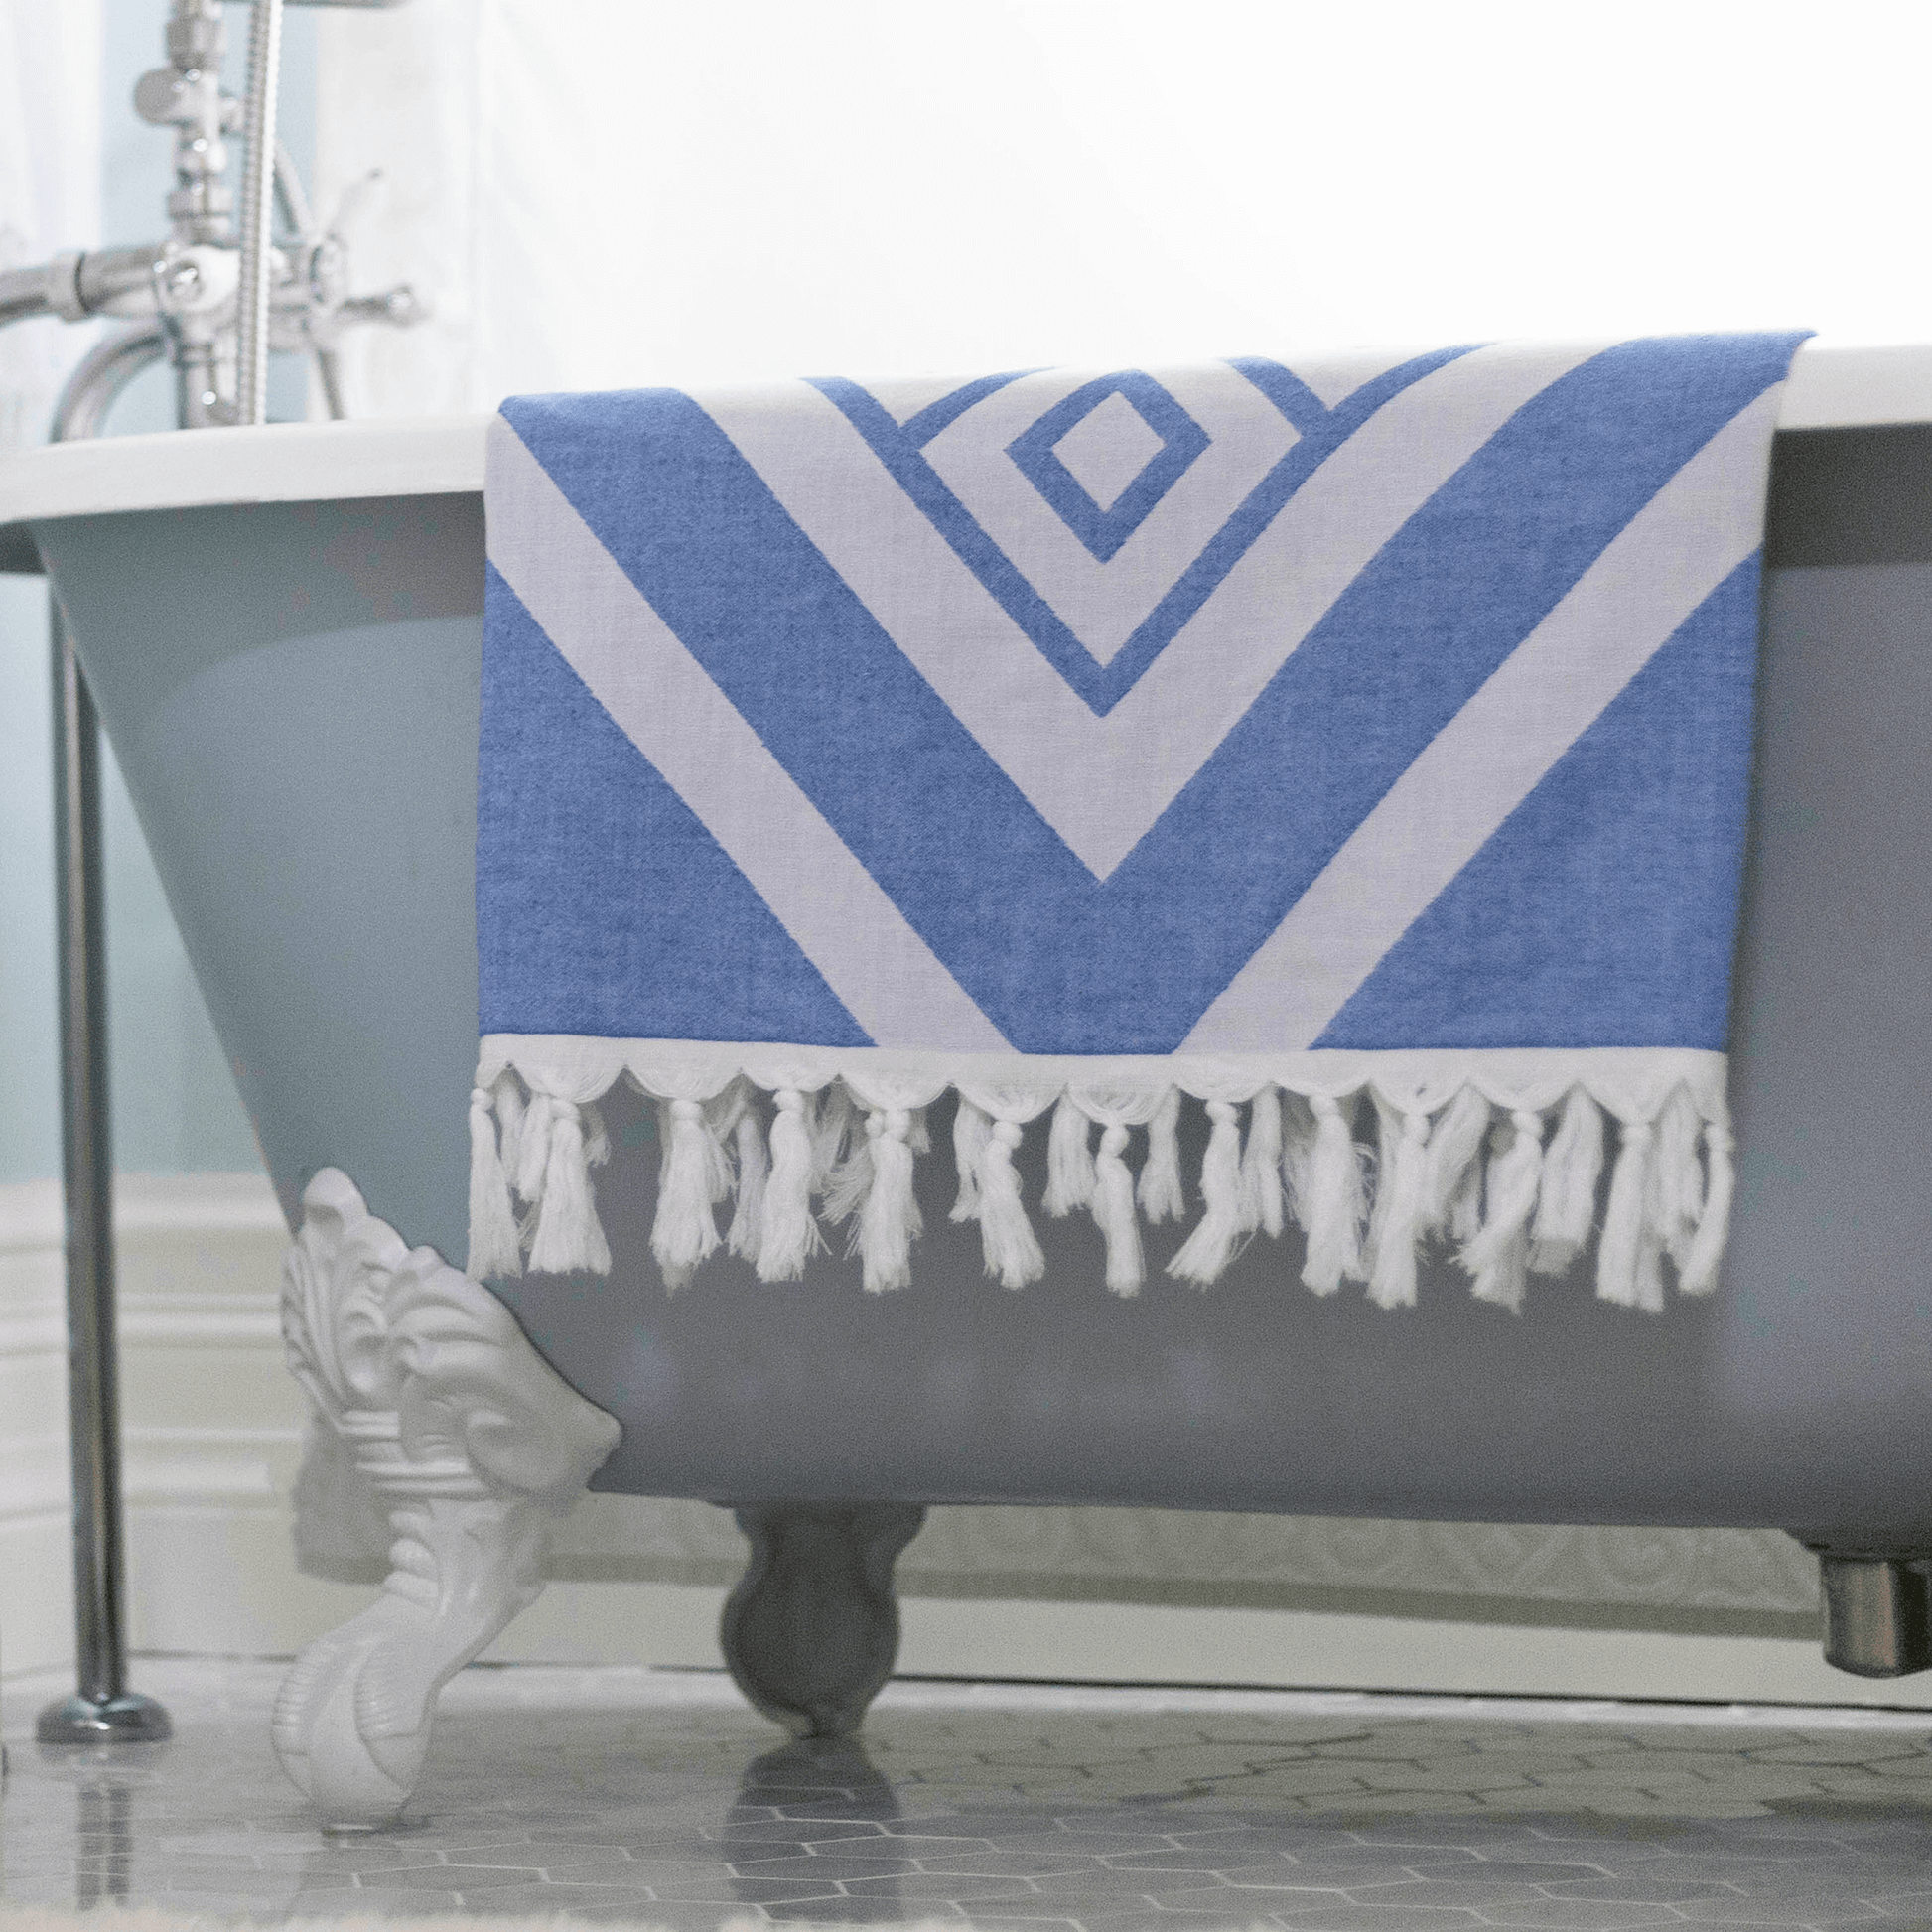 White and blue Turkish towel in the bath